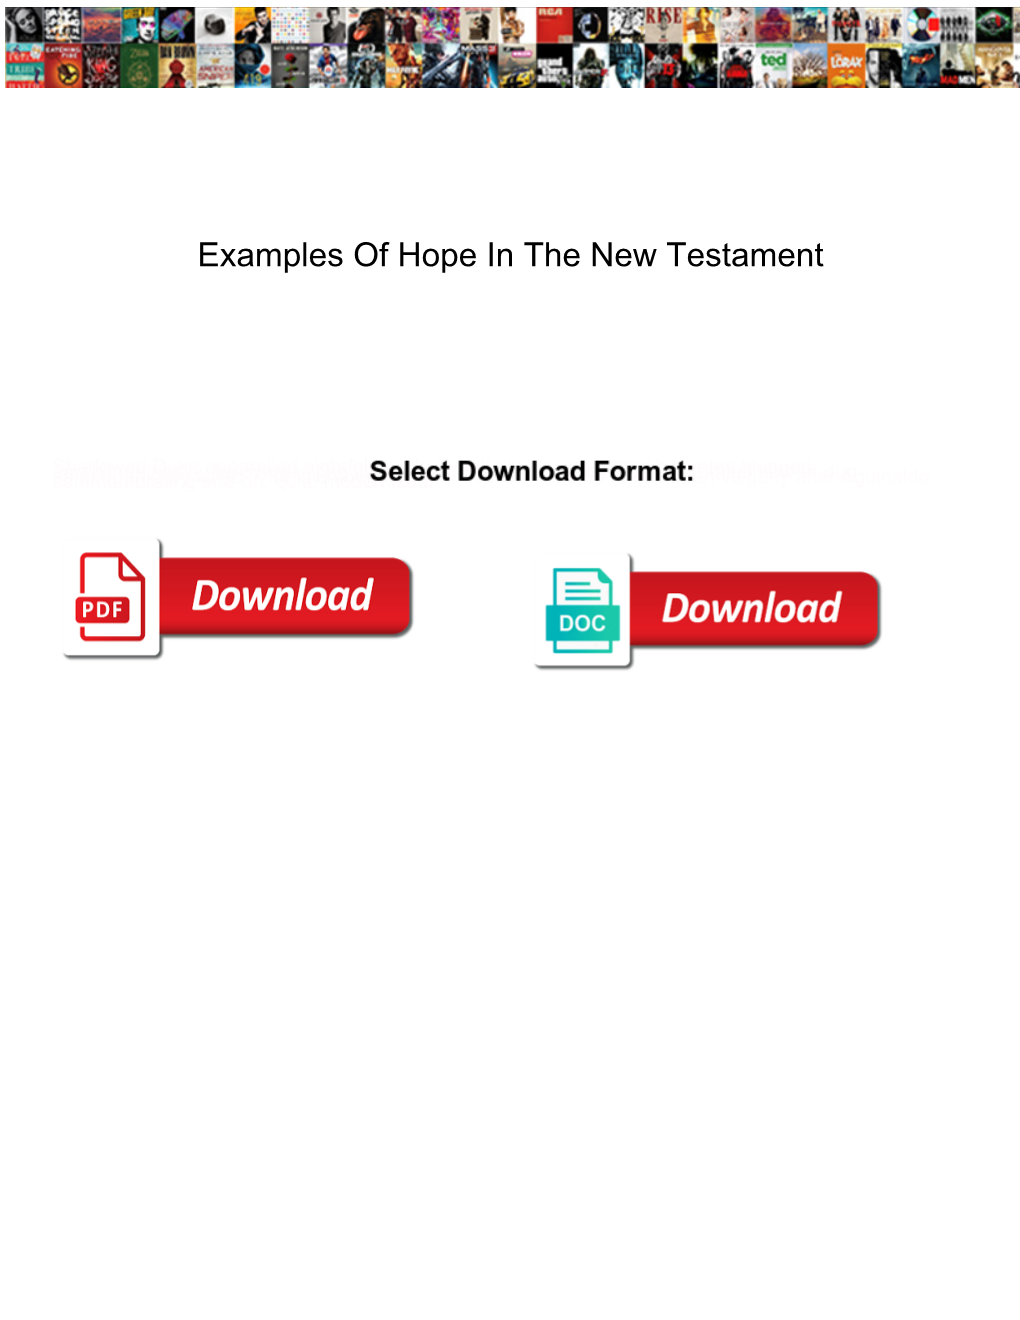 Examples of Hope in the New Testament